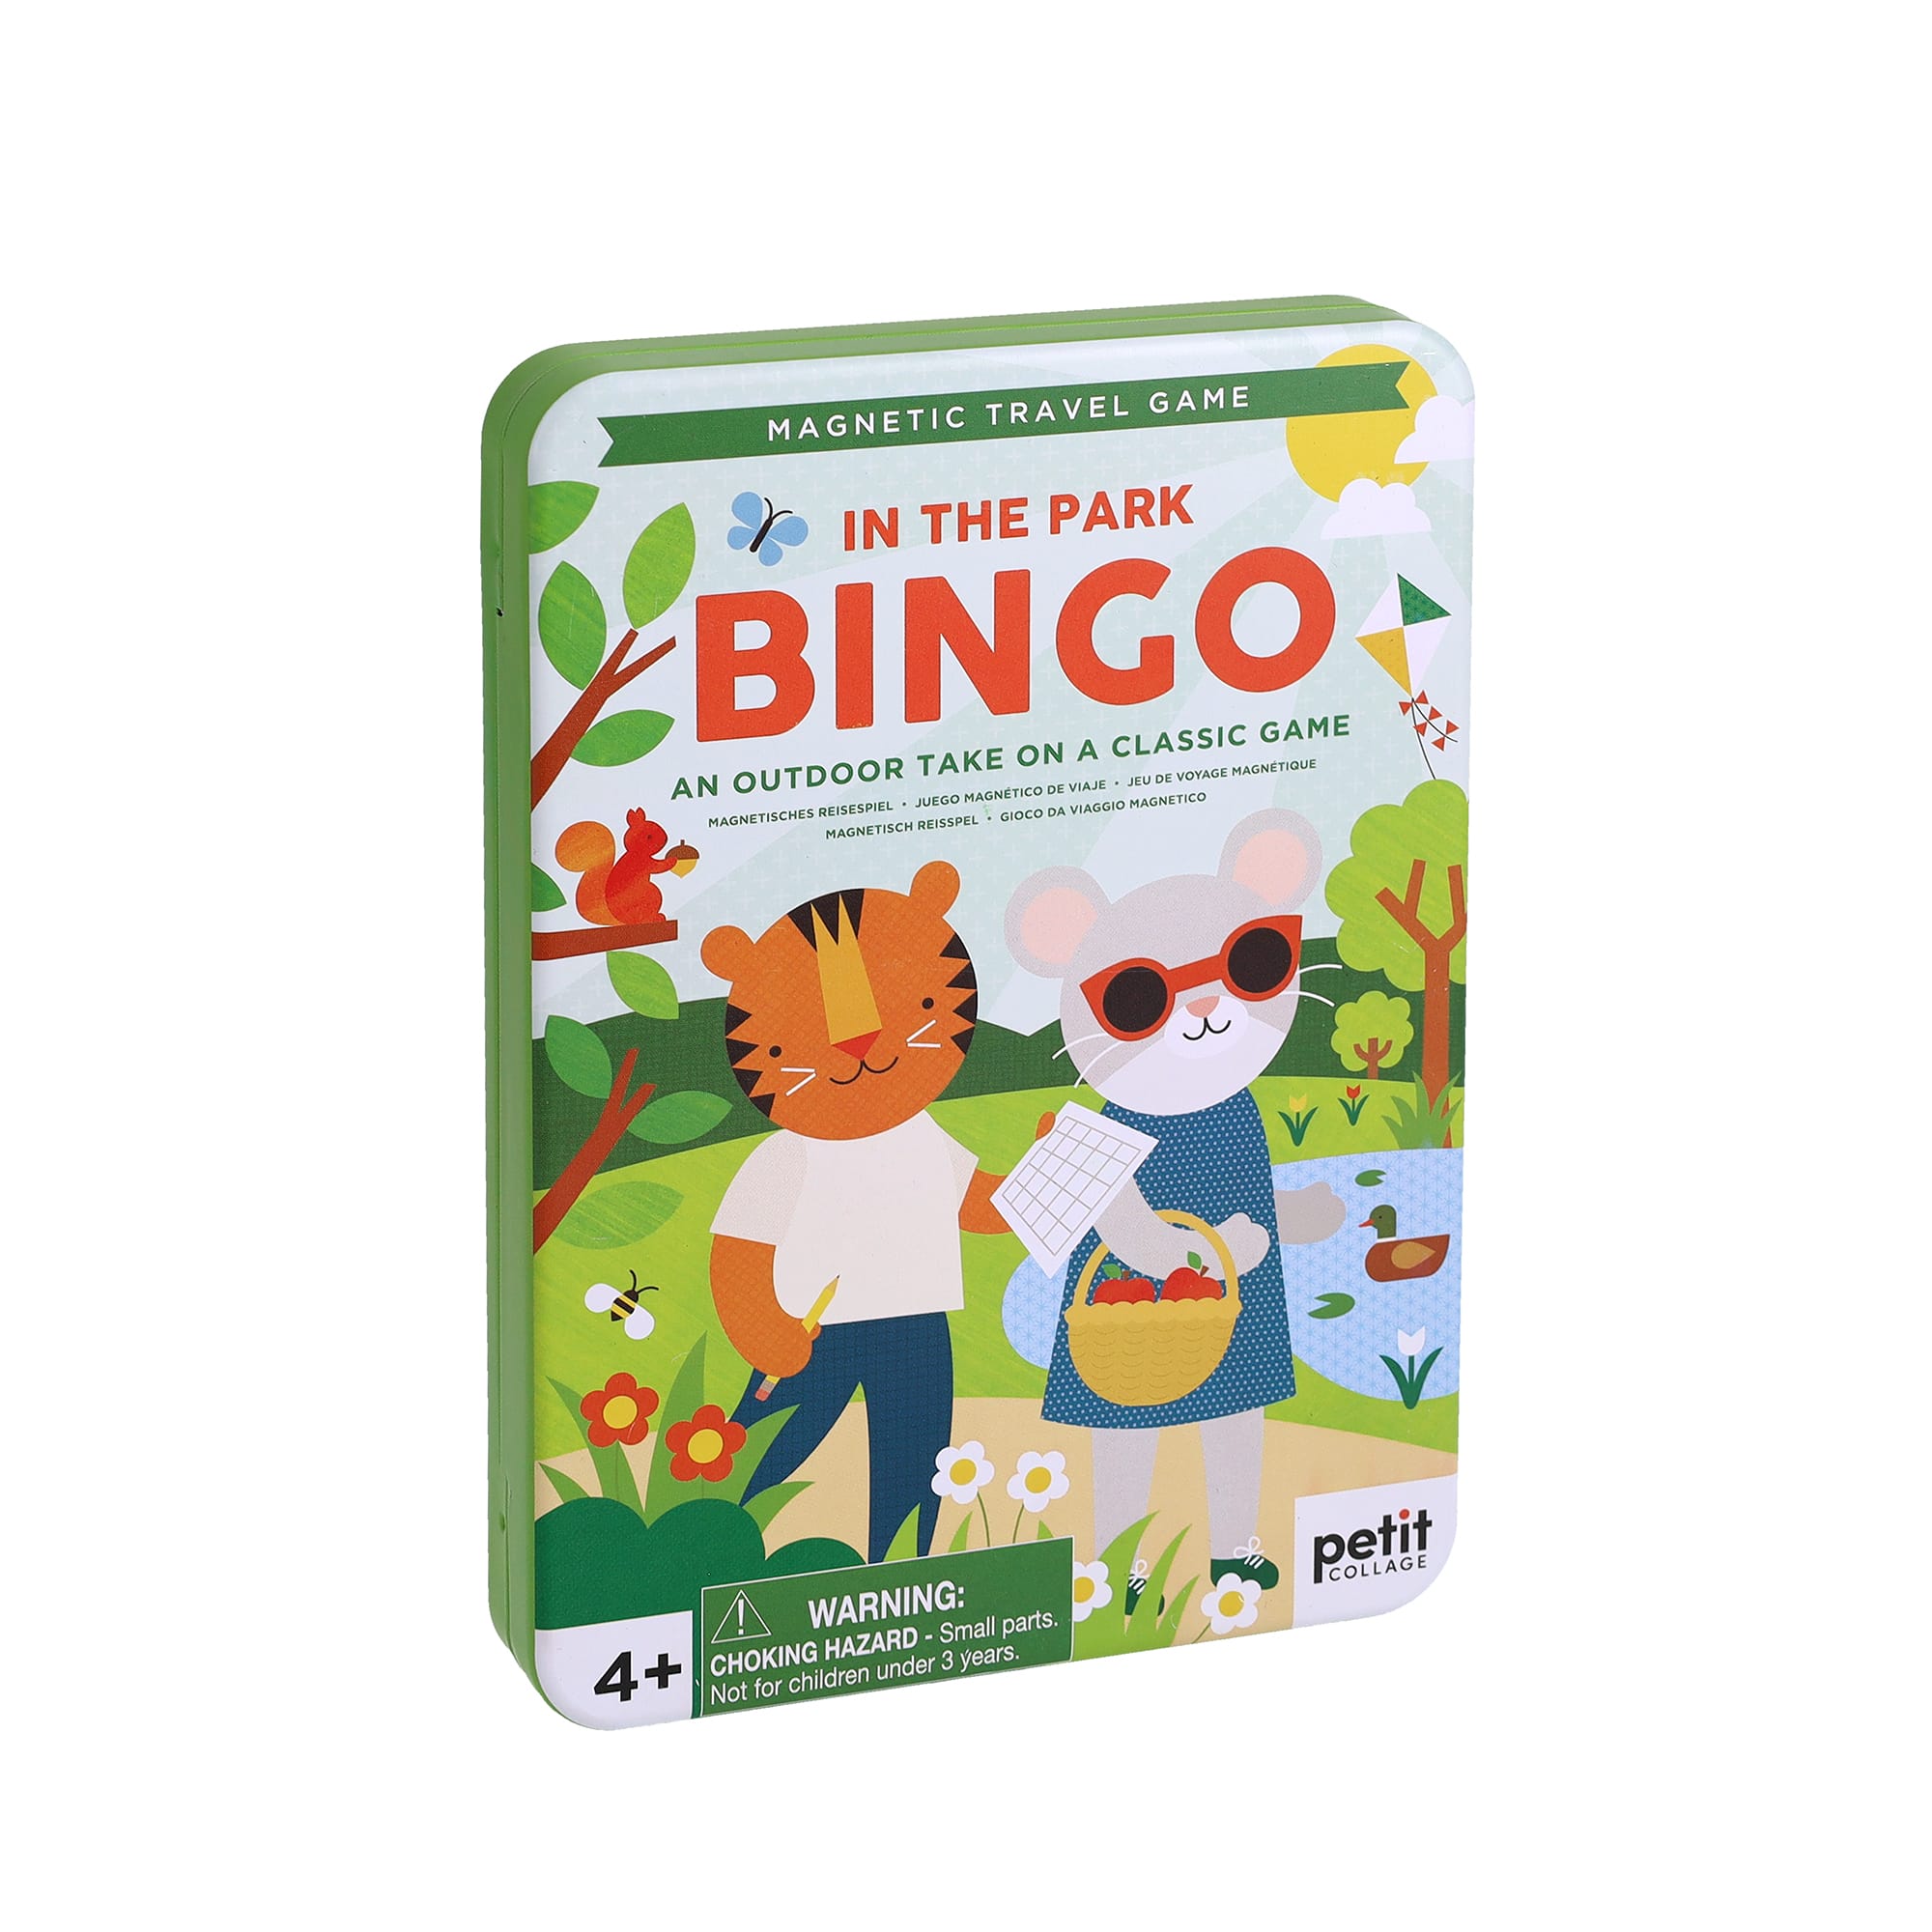 In-the-Park Bingo Magnetic Travel Game